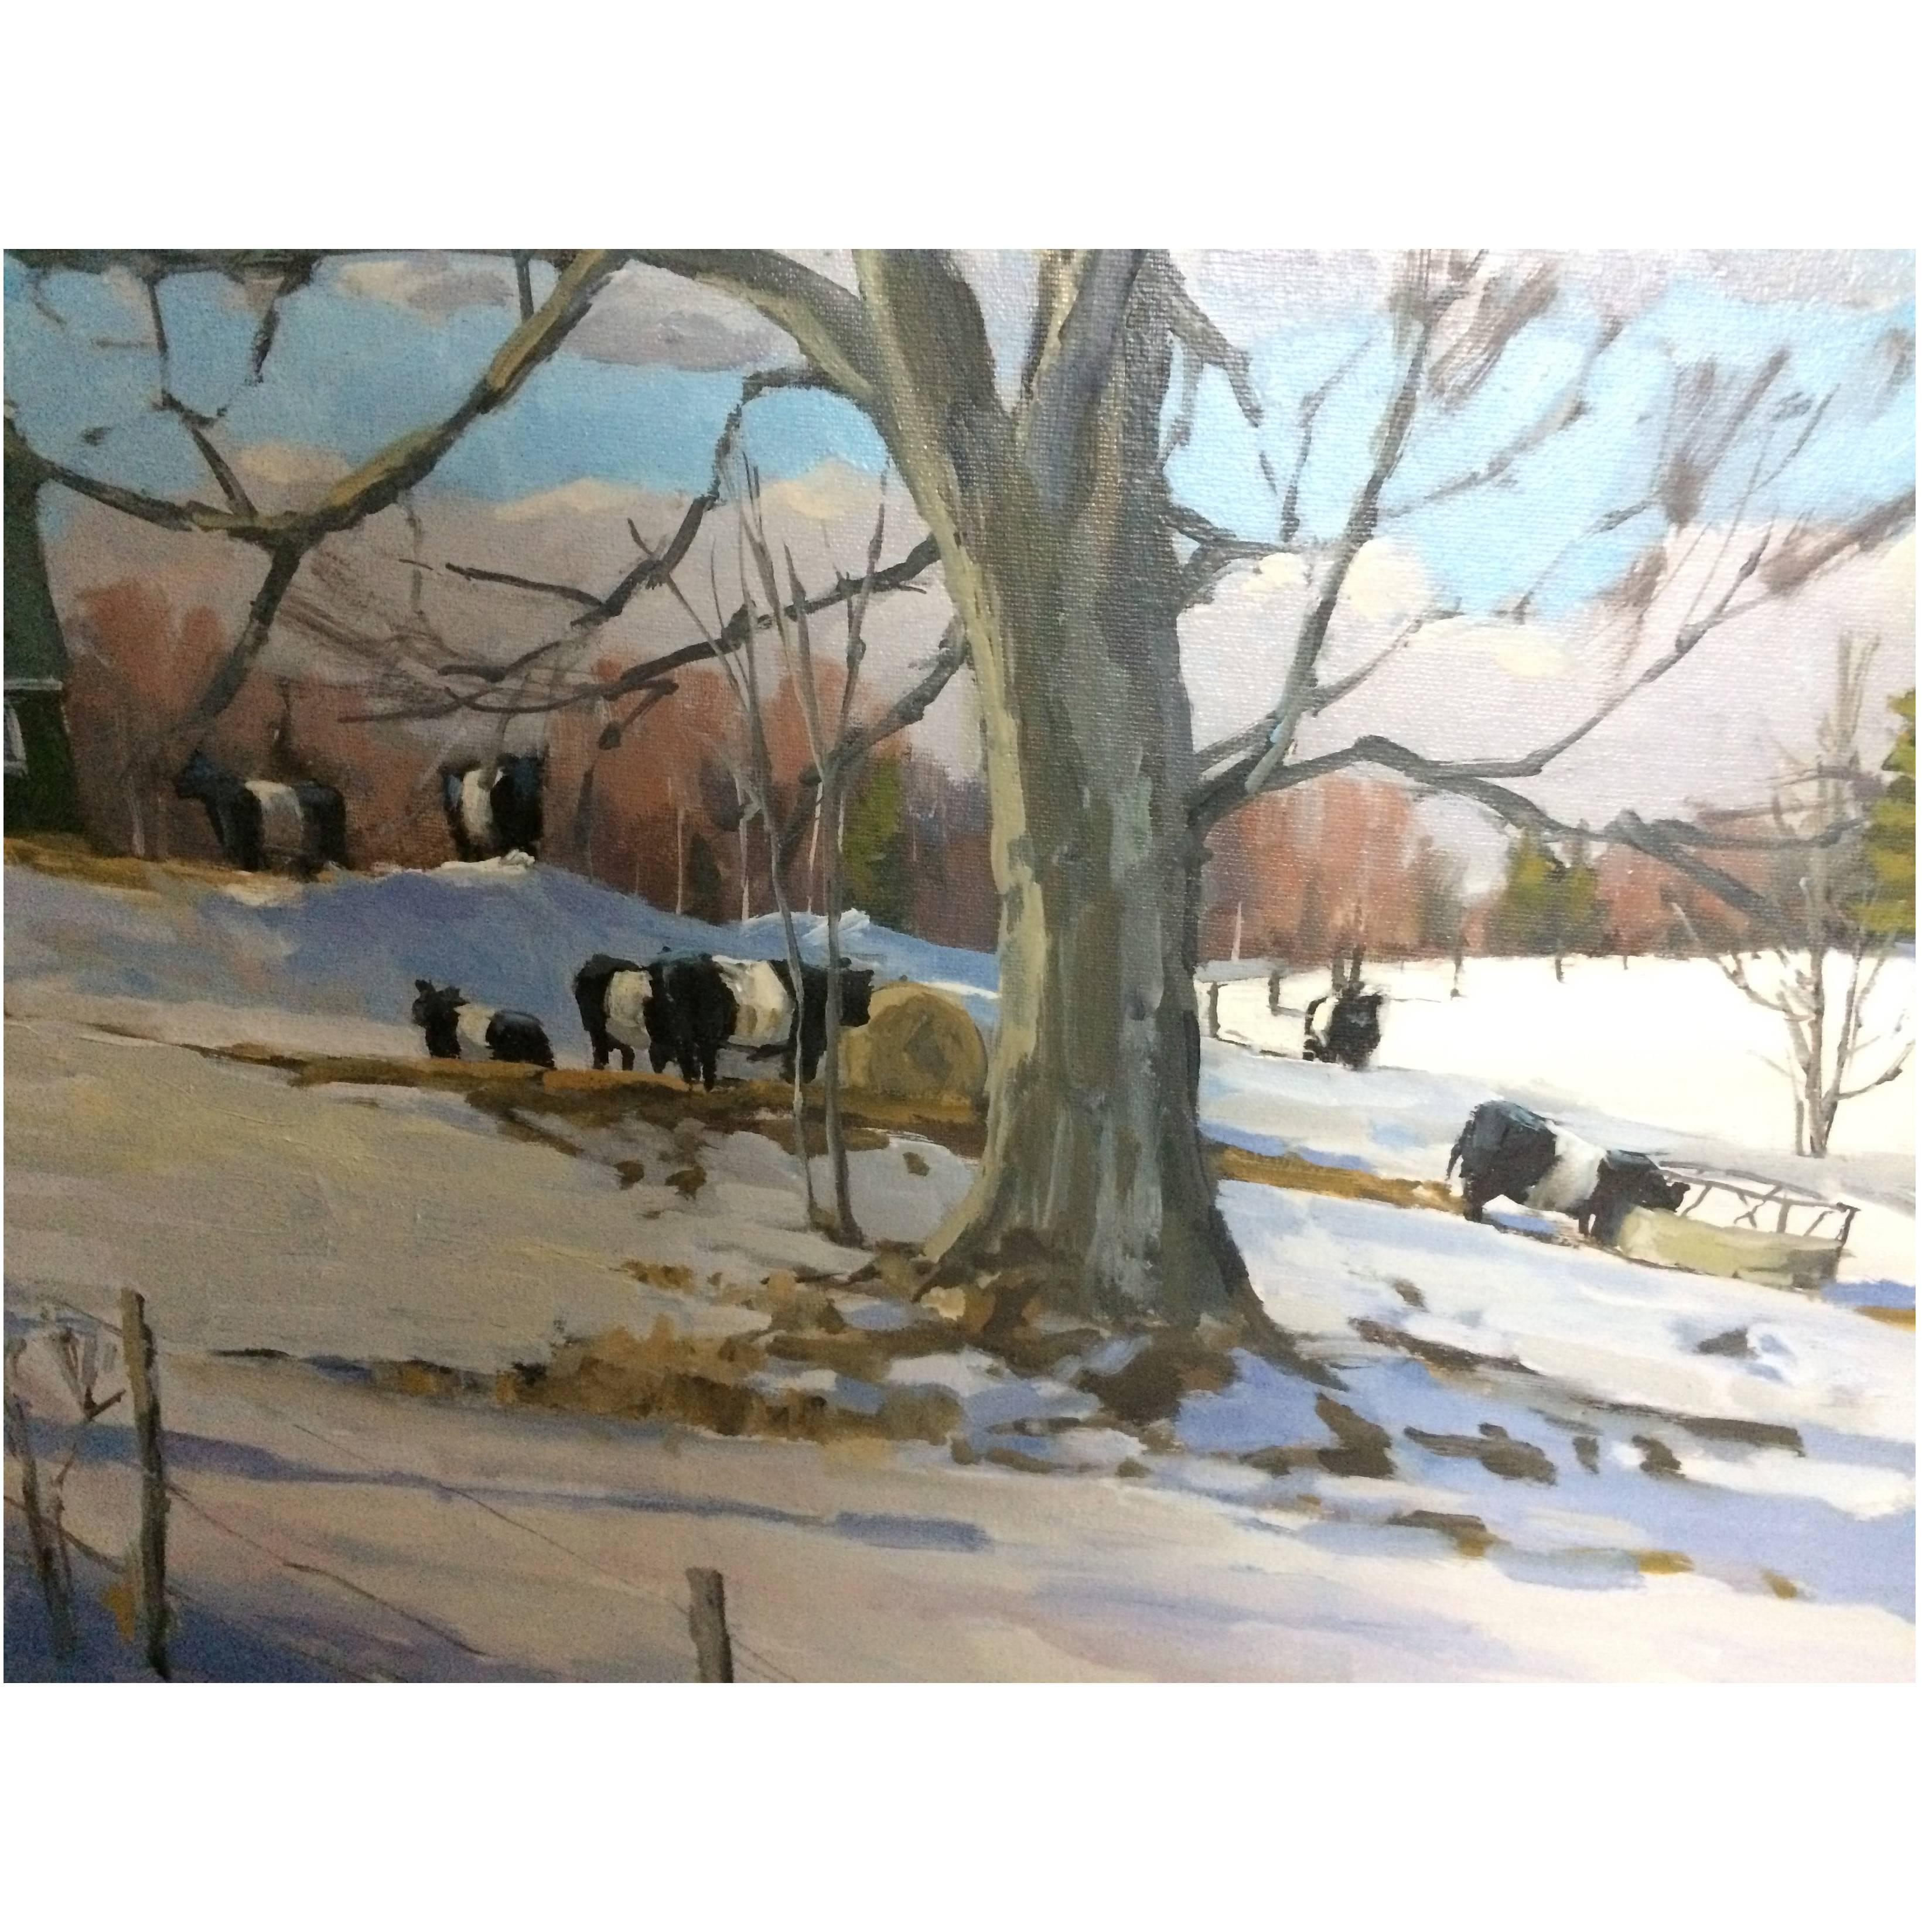 Gorgeous Plein Air Oil Painting of Belted Galloway Cows